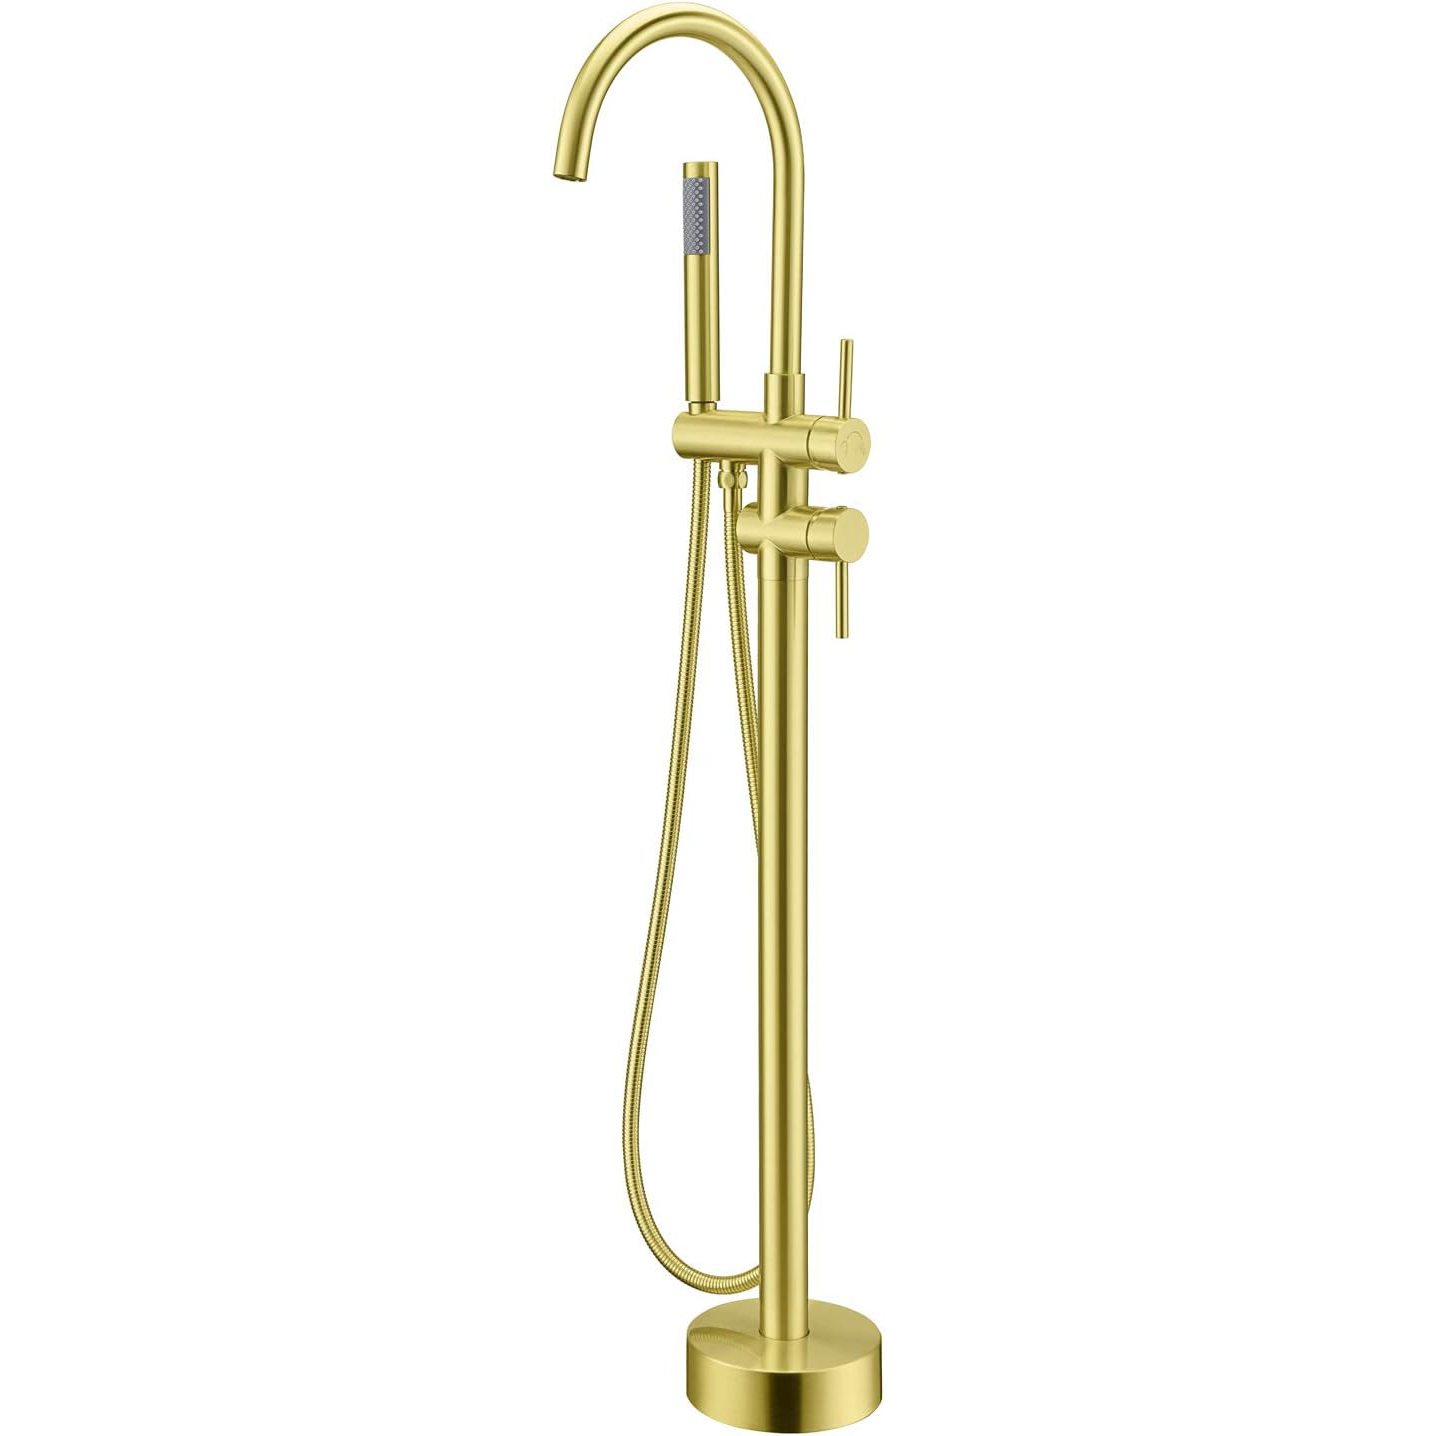 Wovier Floor Mounted Tub Filler Faucet, Freestanding Bathtub Faucet with Hand Shower W8790